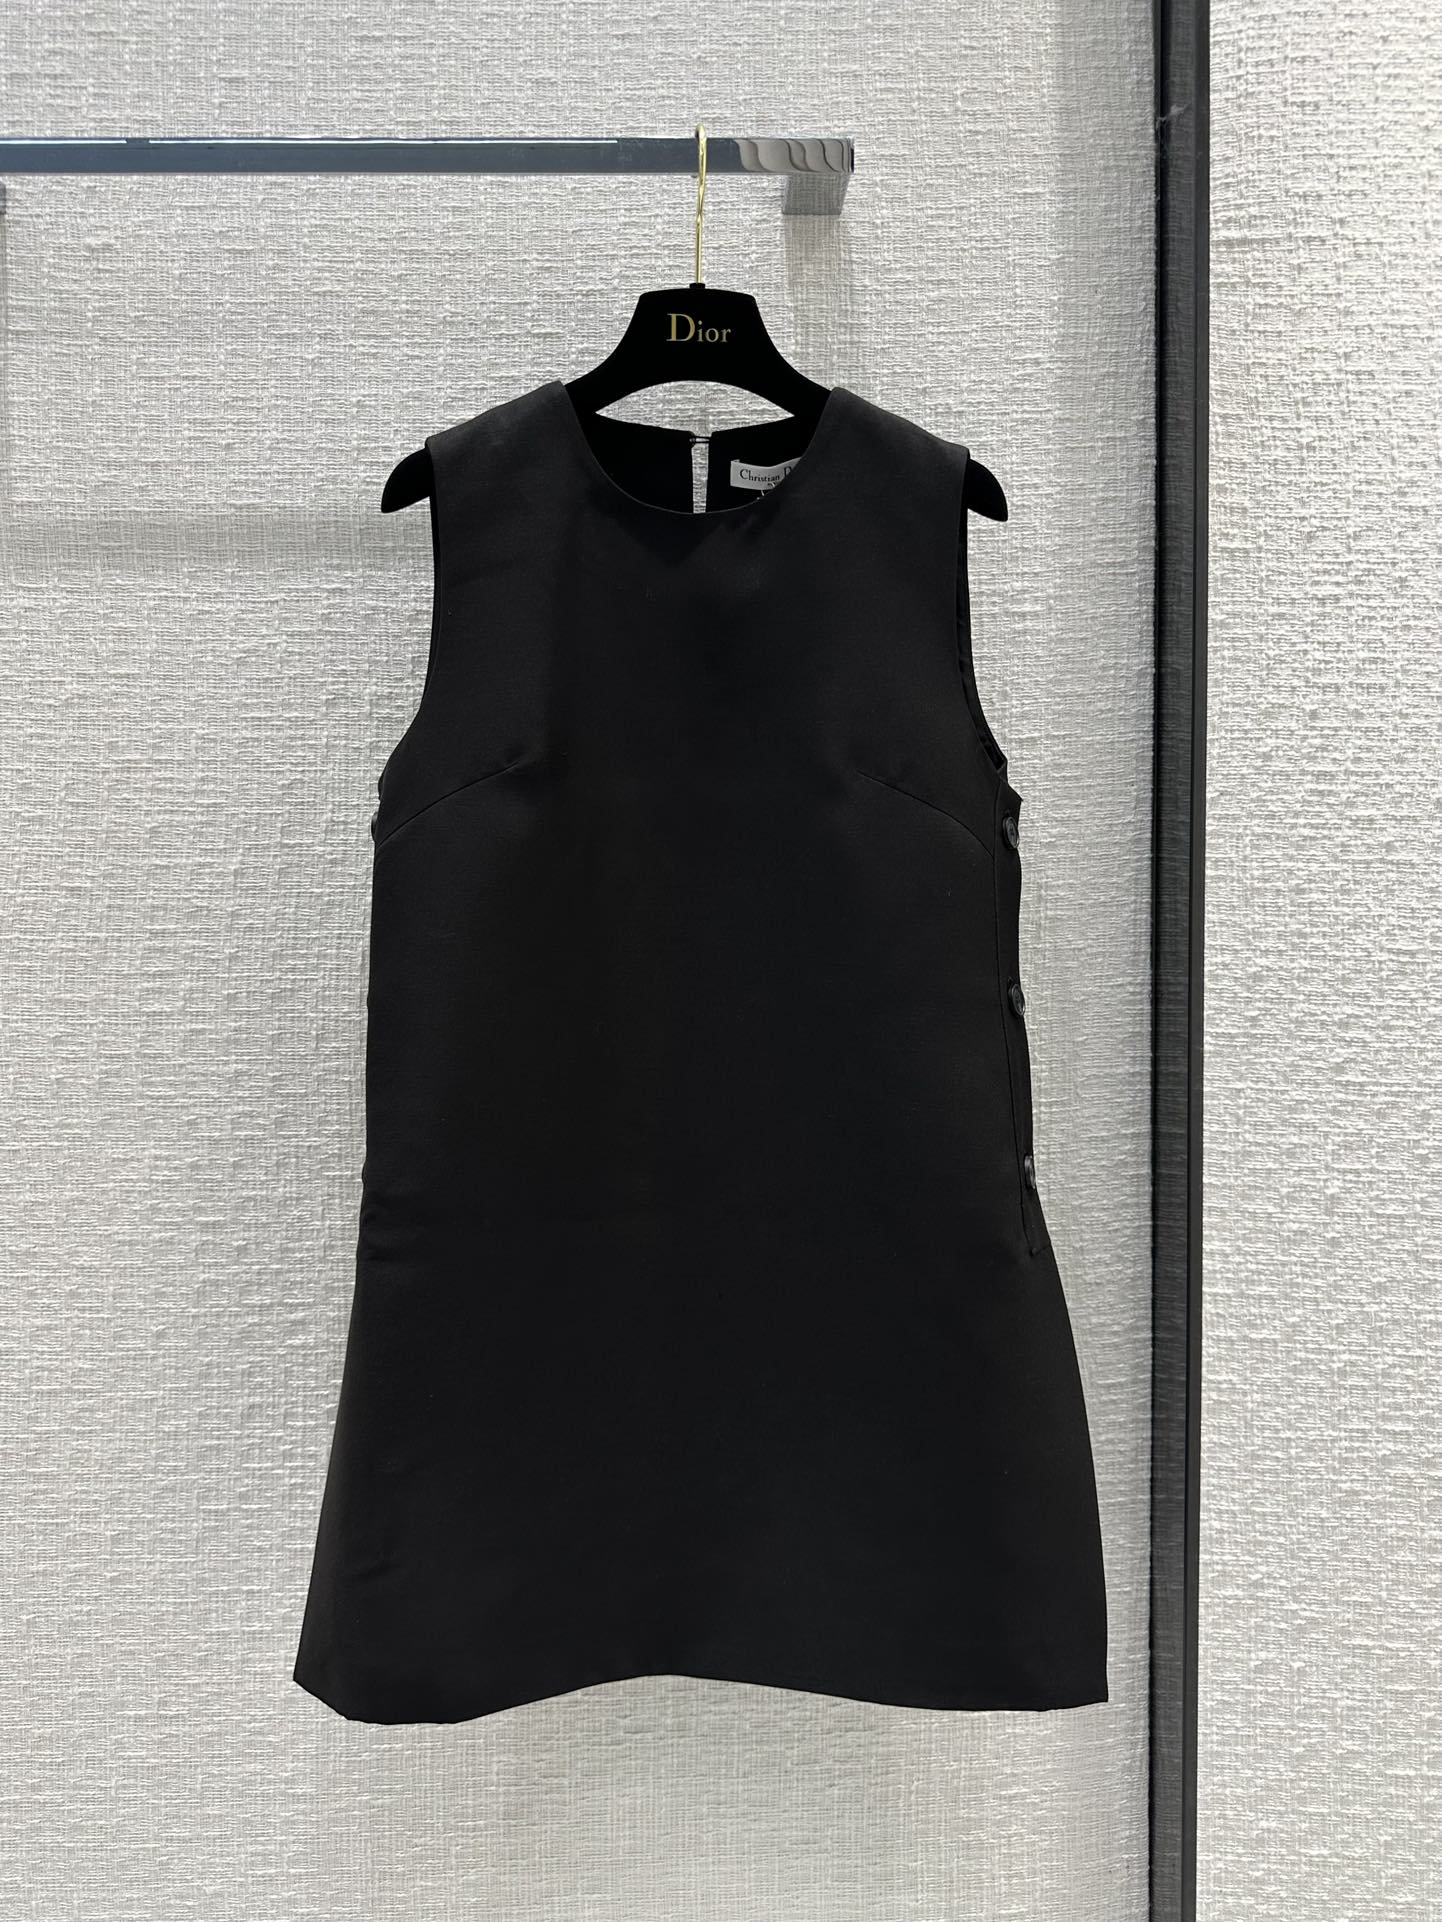 Dior Clothing Dresses Waistcoat Fall/Winter Collection